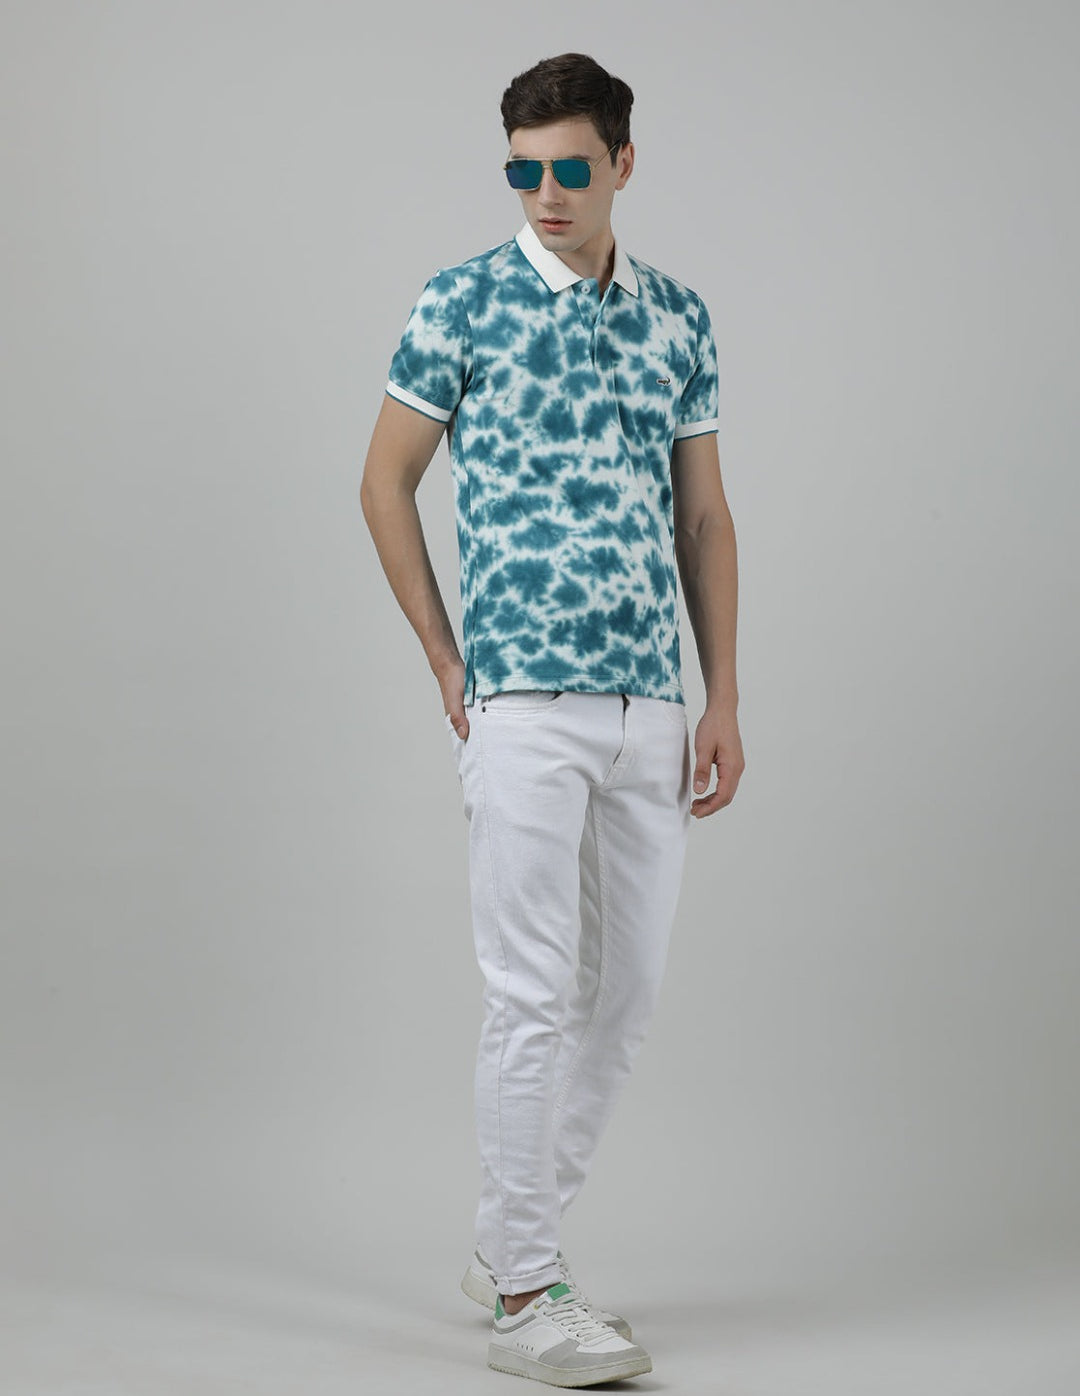 Crocodile Casual Verdigris T-Shirt Tie and Dye Half Sleeve Slim Fit with Collar for Men